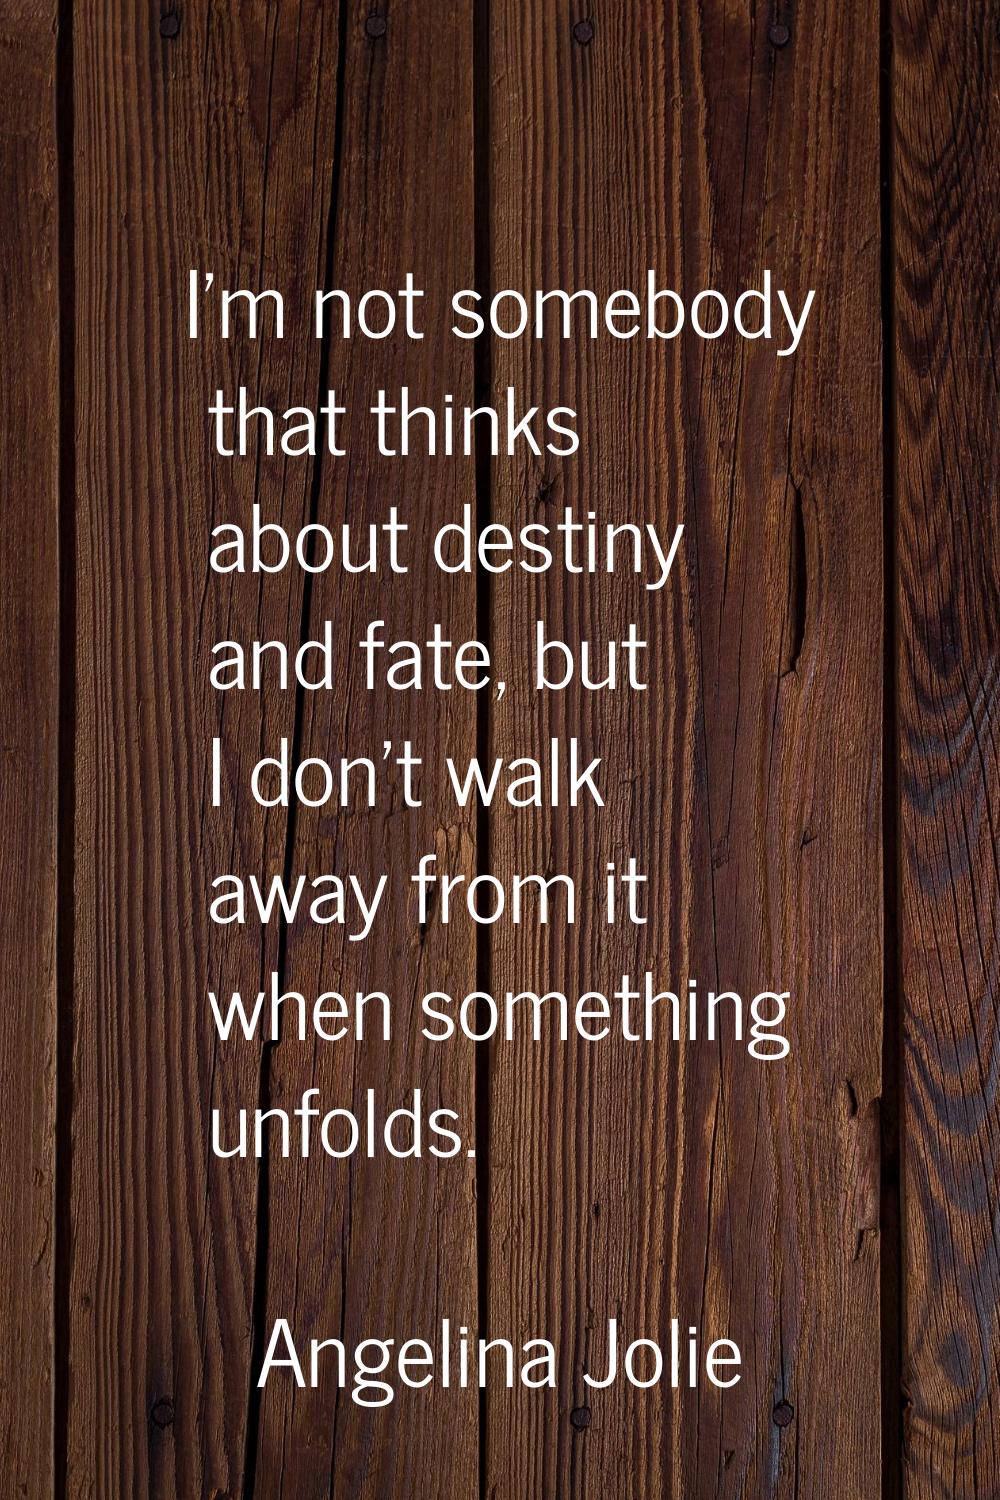 I'm not somebody that thinks about destiny and fate, but I don't walk away from it when something u